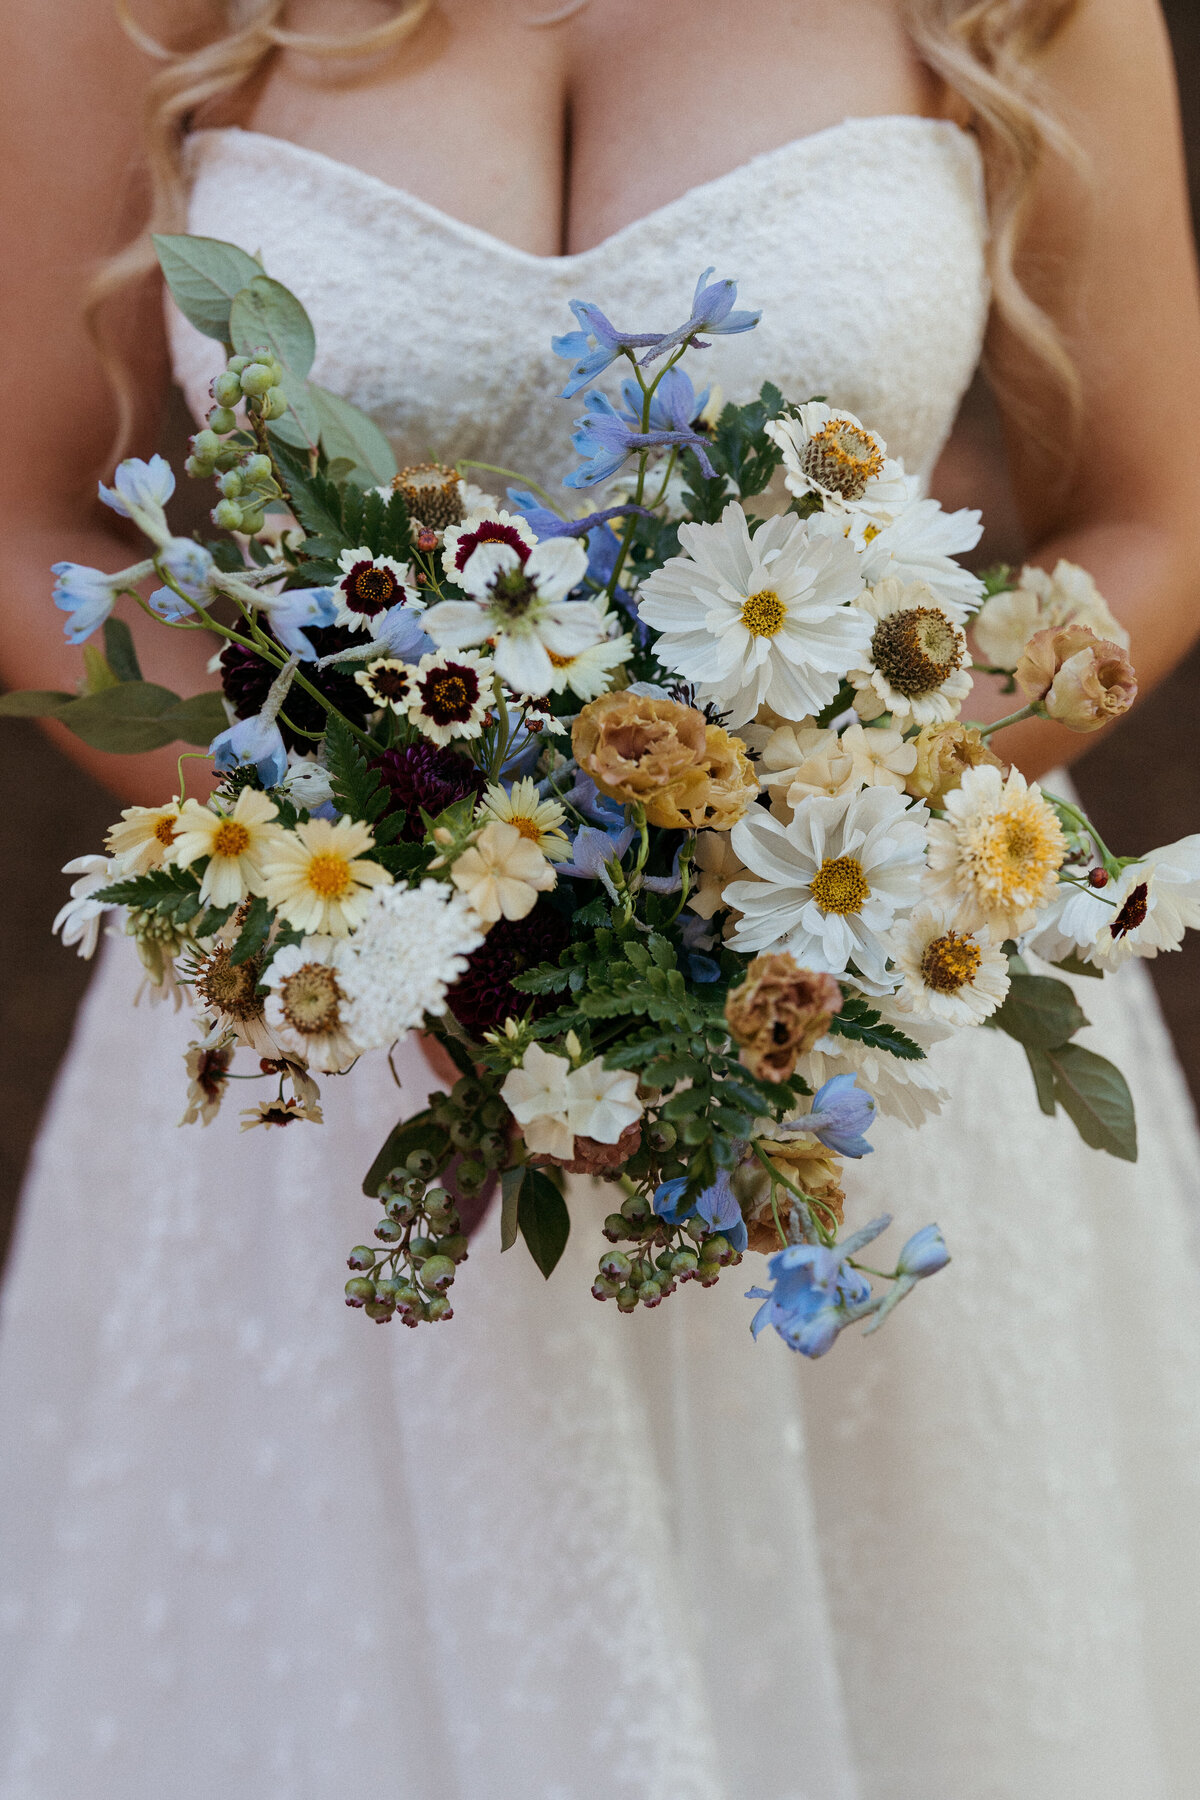 Whimsical wildflower bridal bouquet with shades of white, gold, plum, and blue